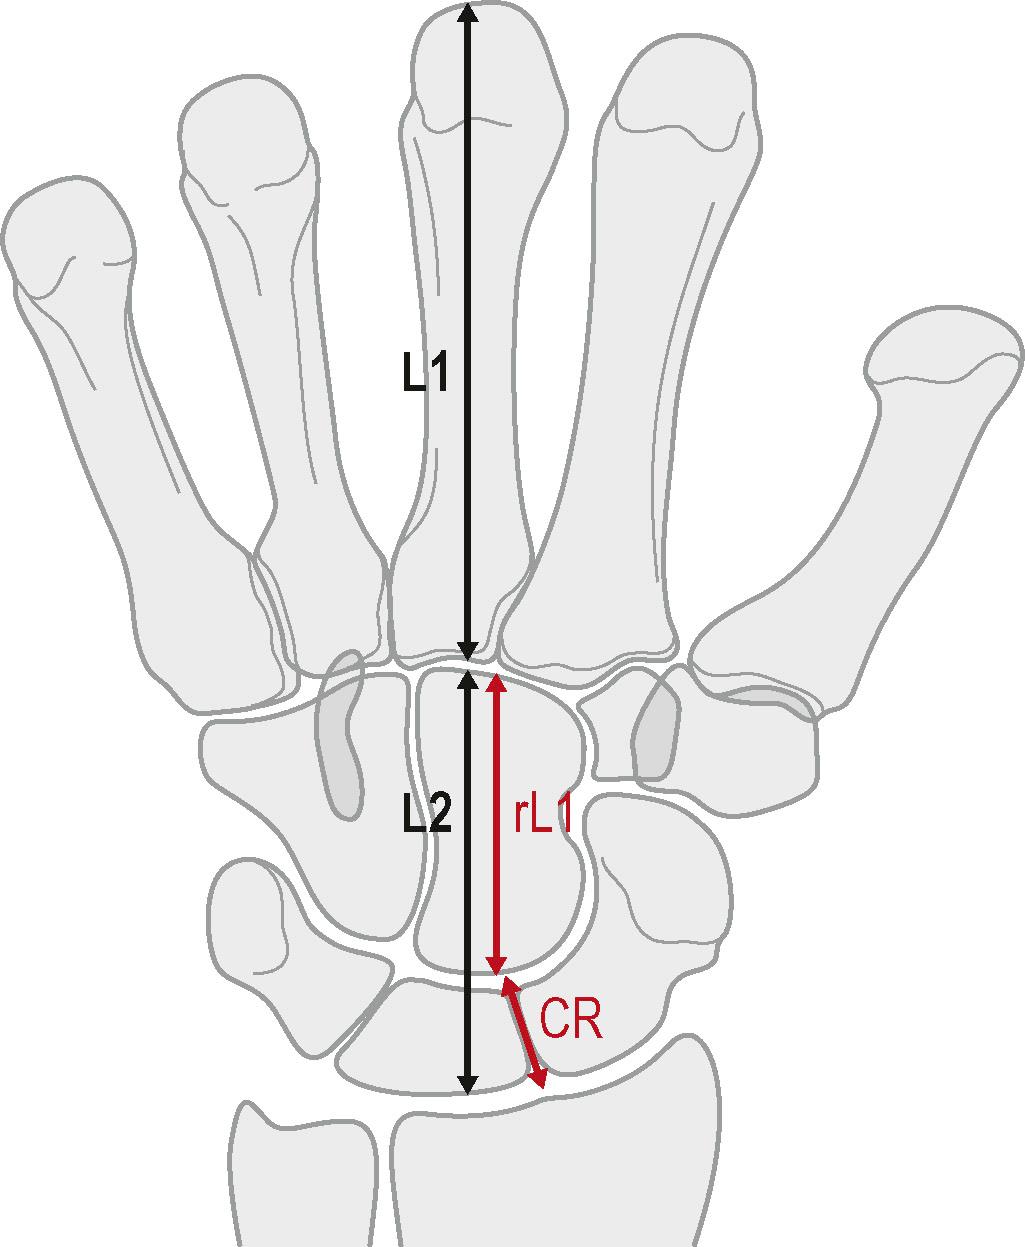 Figure 3.16, (1) Carpal height ratio = carpal height (L2)/third metacarpal length (L1). Normal is 0.54 ± 0.03. (2) Revised carpal height ratio = carpal height (L2)/heights of capitate (rL1). (3) Capitate–radius index (CR). This is the shortest line between two eccentric arches of the carpal rows. The line is moved until the shortest distance is measured. Mean CR index 0.999 ± 0.034. Values less than 0.92 are abnormal.